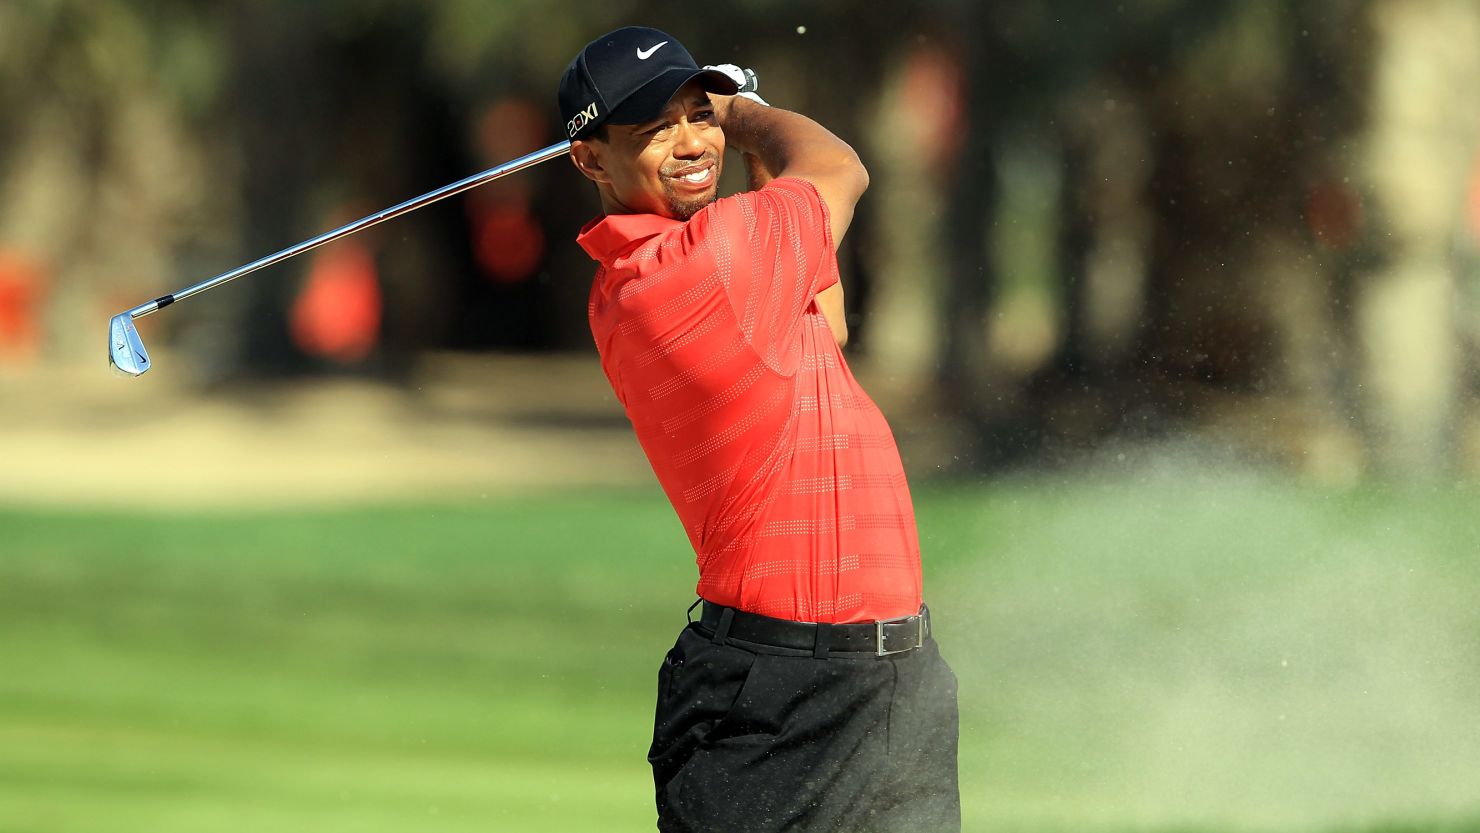 Tiger Woods has not won one of golf's four majors since the 2008 U.S. Open at Torrey Pines.